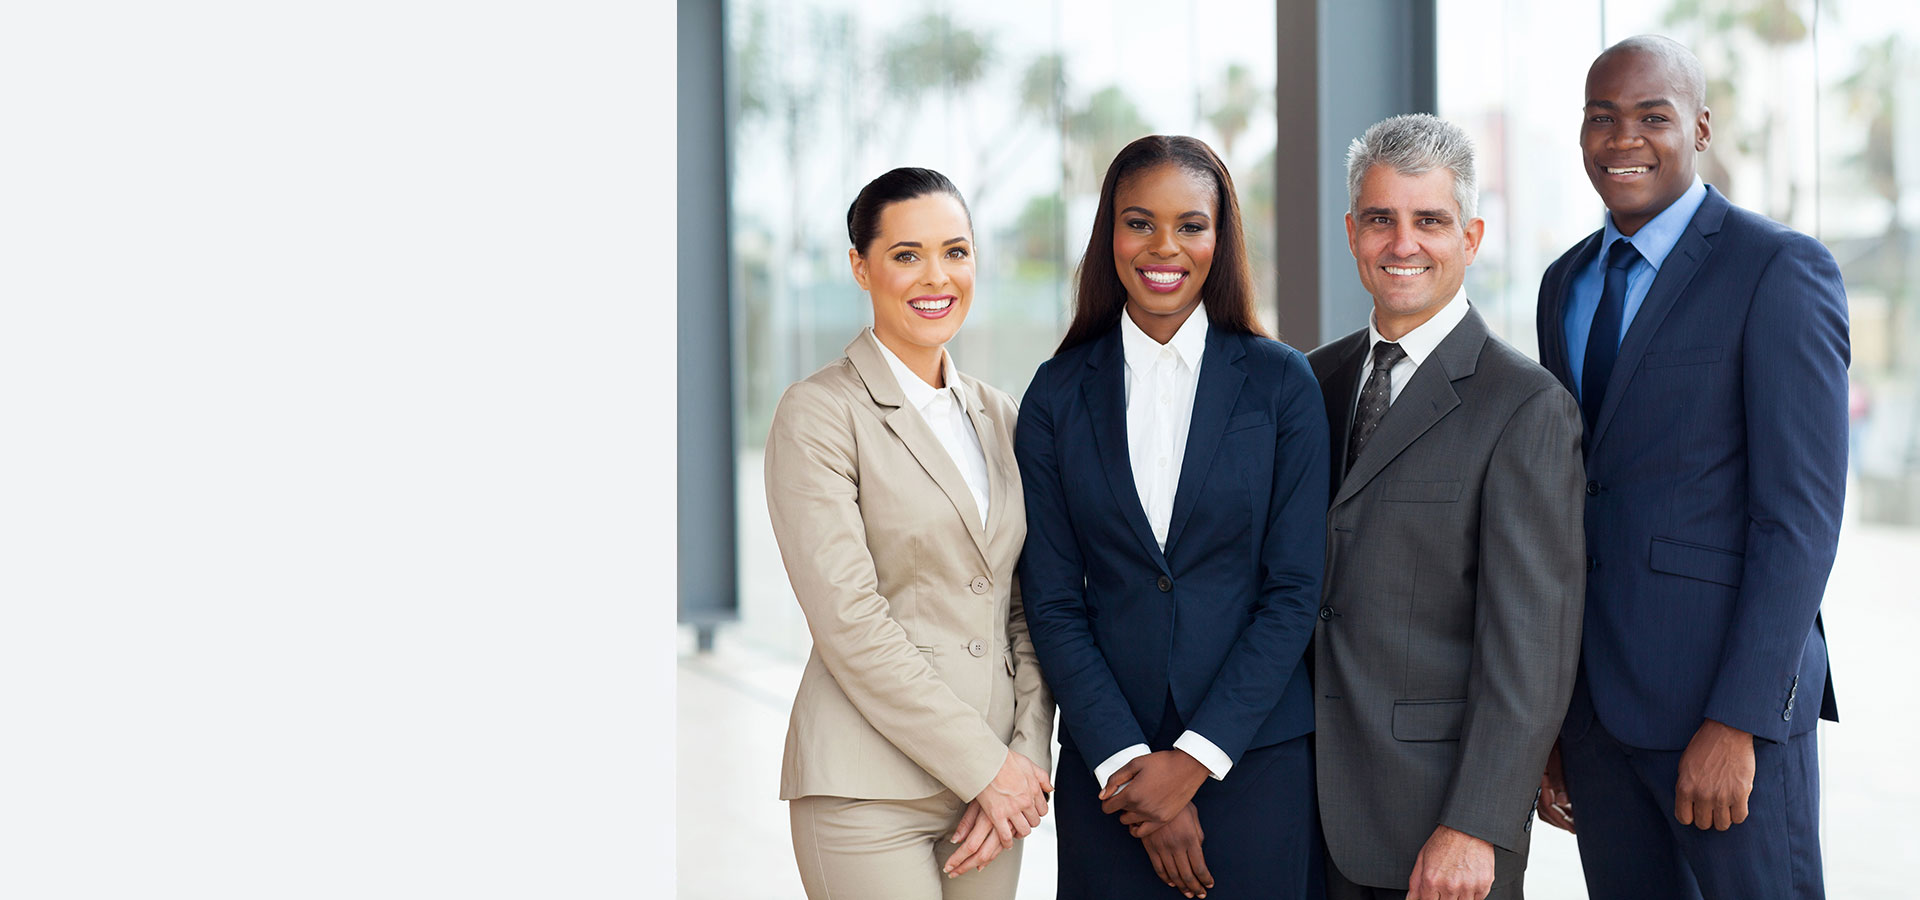 Image of two businesswomen and two businessmen standing and happy